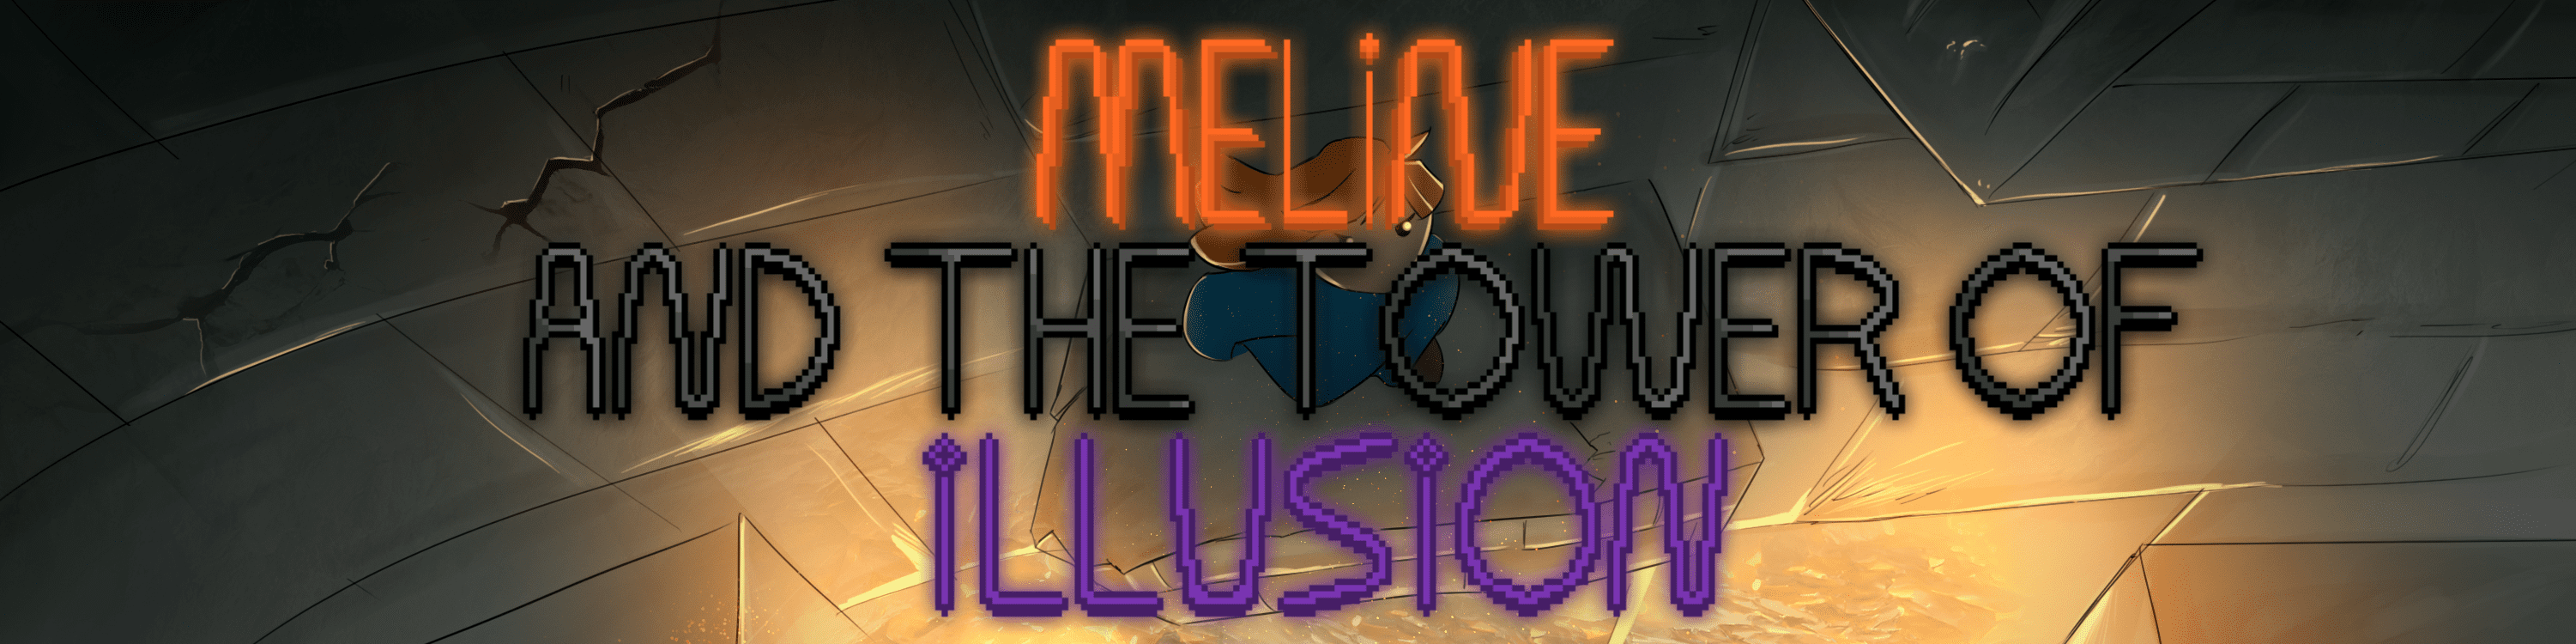 Meline and the tower of illusion